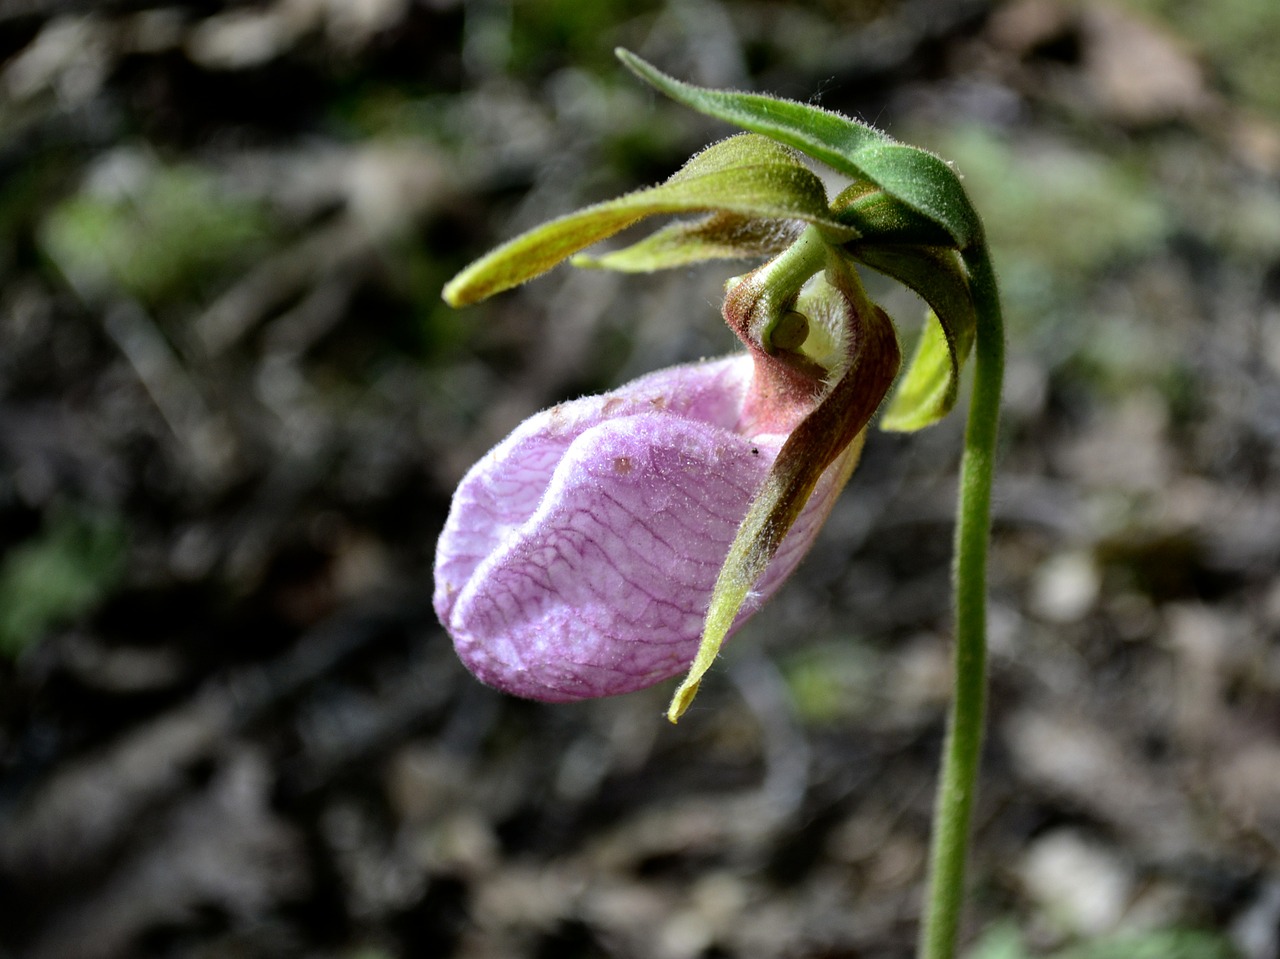 slipper orchid flower nature free photo